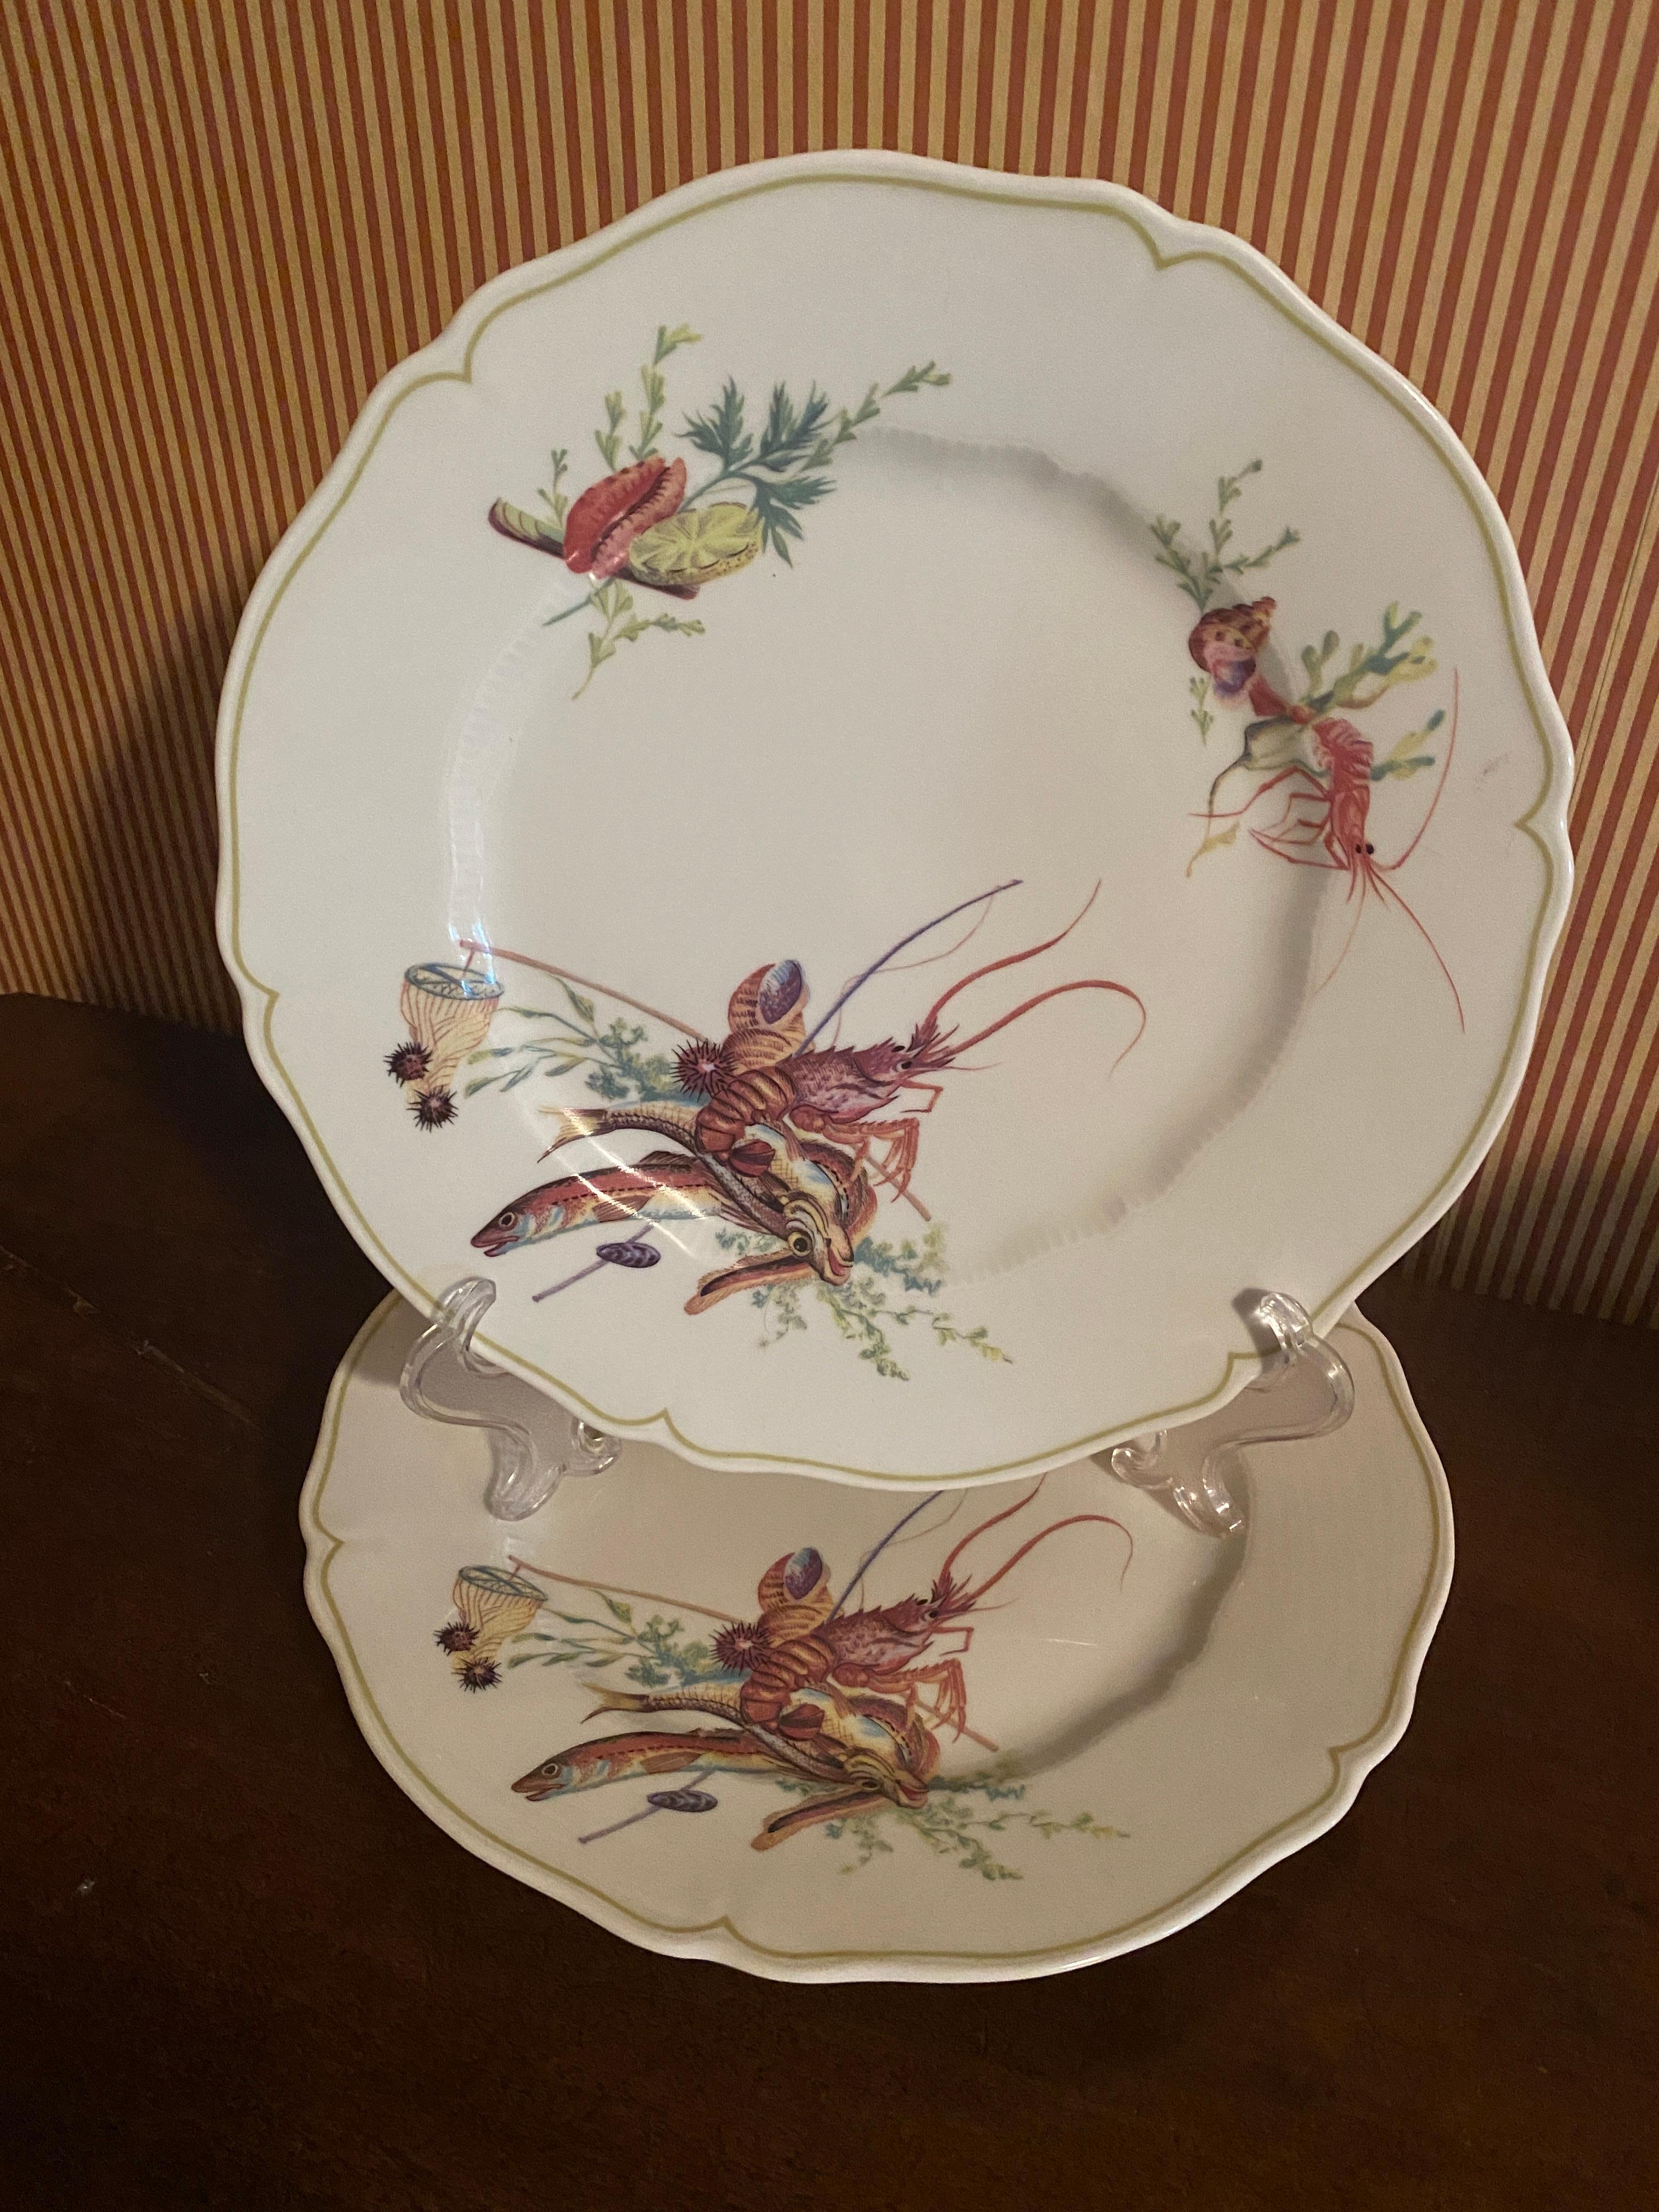 Set of 12 Havilland- Limoges Dinner Plates, Six Fish and Crustacean Designs For Sale 1